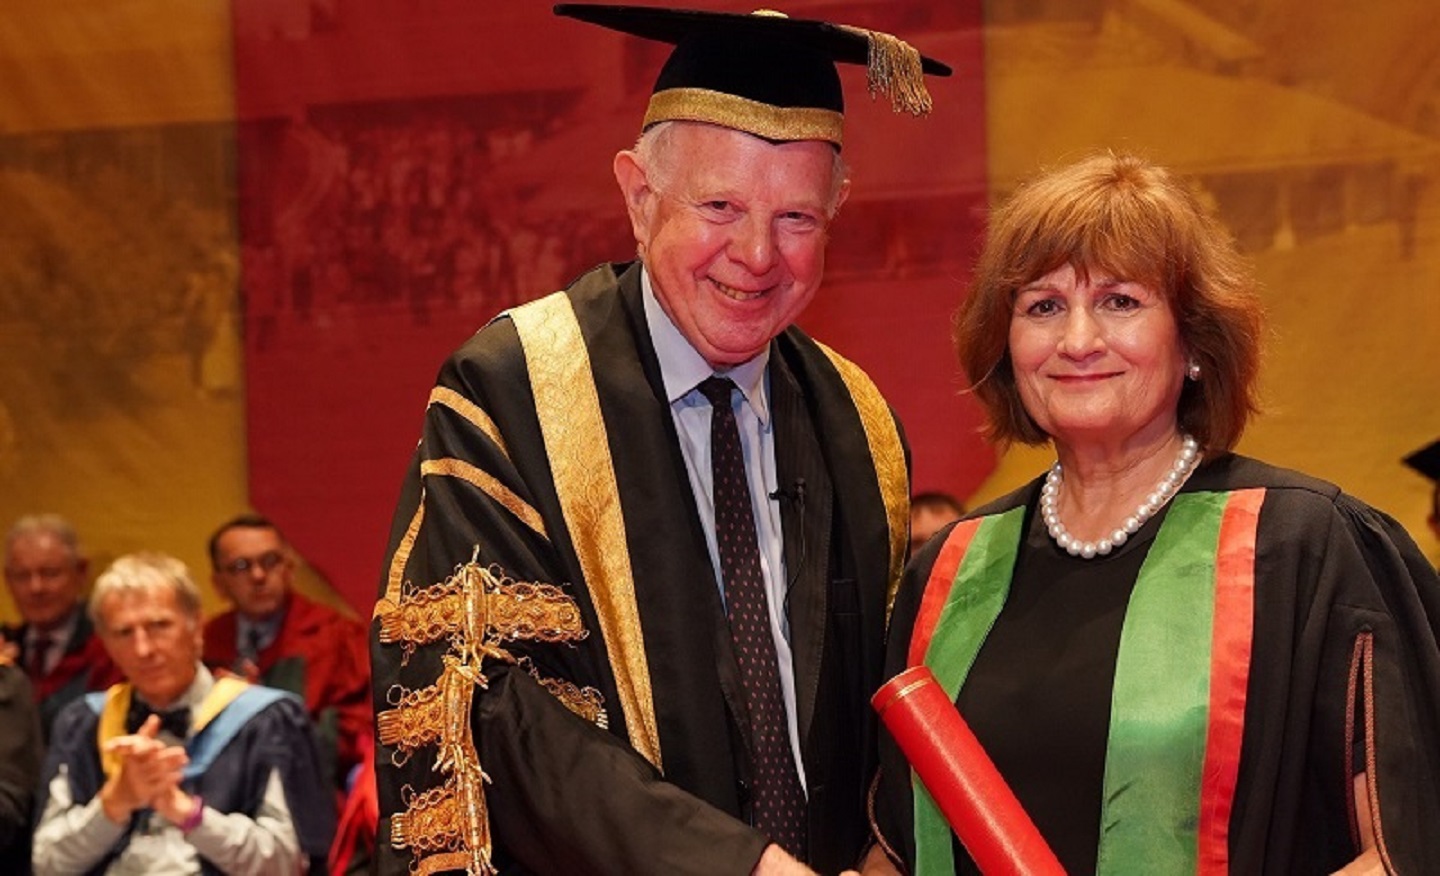 Aberystwyth alumna and leading figure in the international campaign to eradicate polio, Judith Diment, being presented as Fellow of Aberystwyth University by University Chancellor Lord Thomas of Cwmgiedd during Graduation 2019 